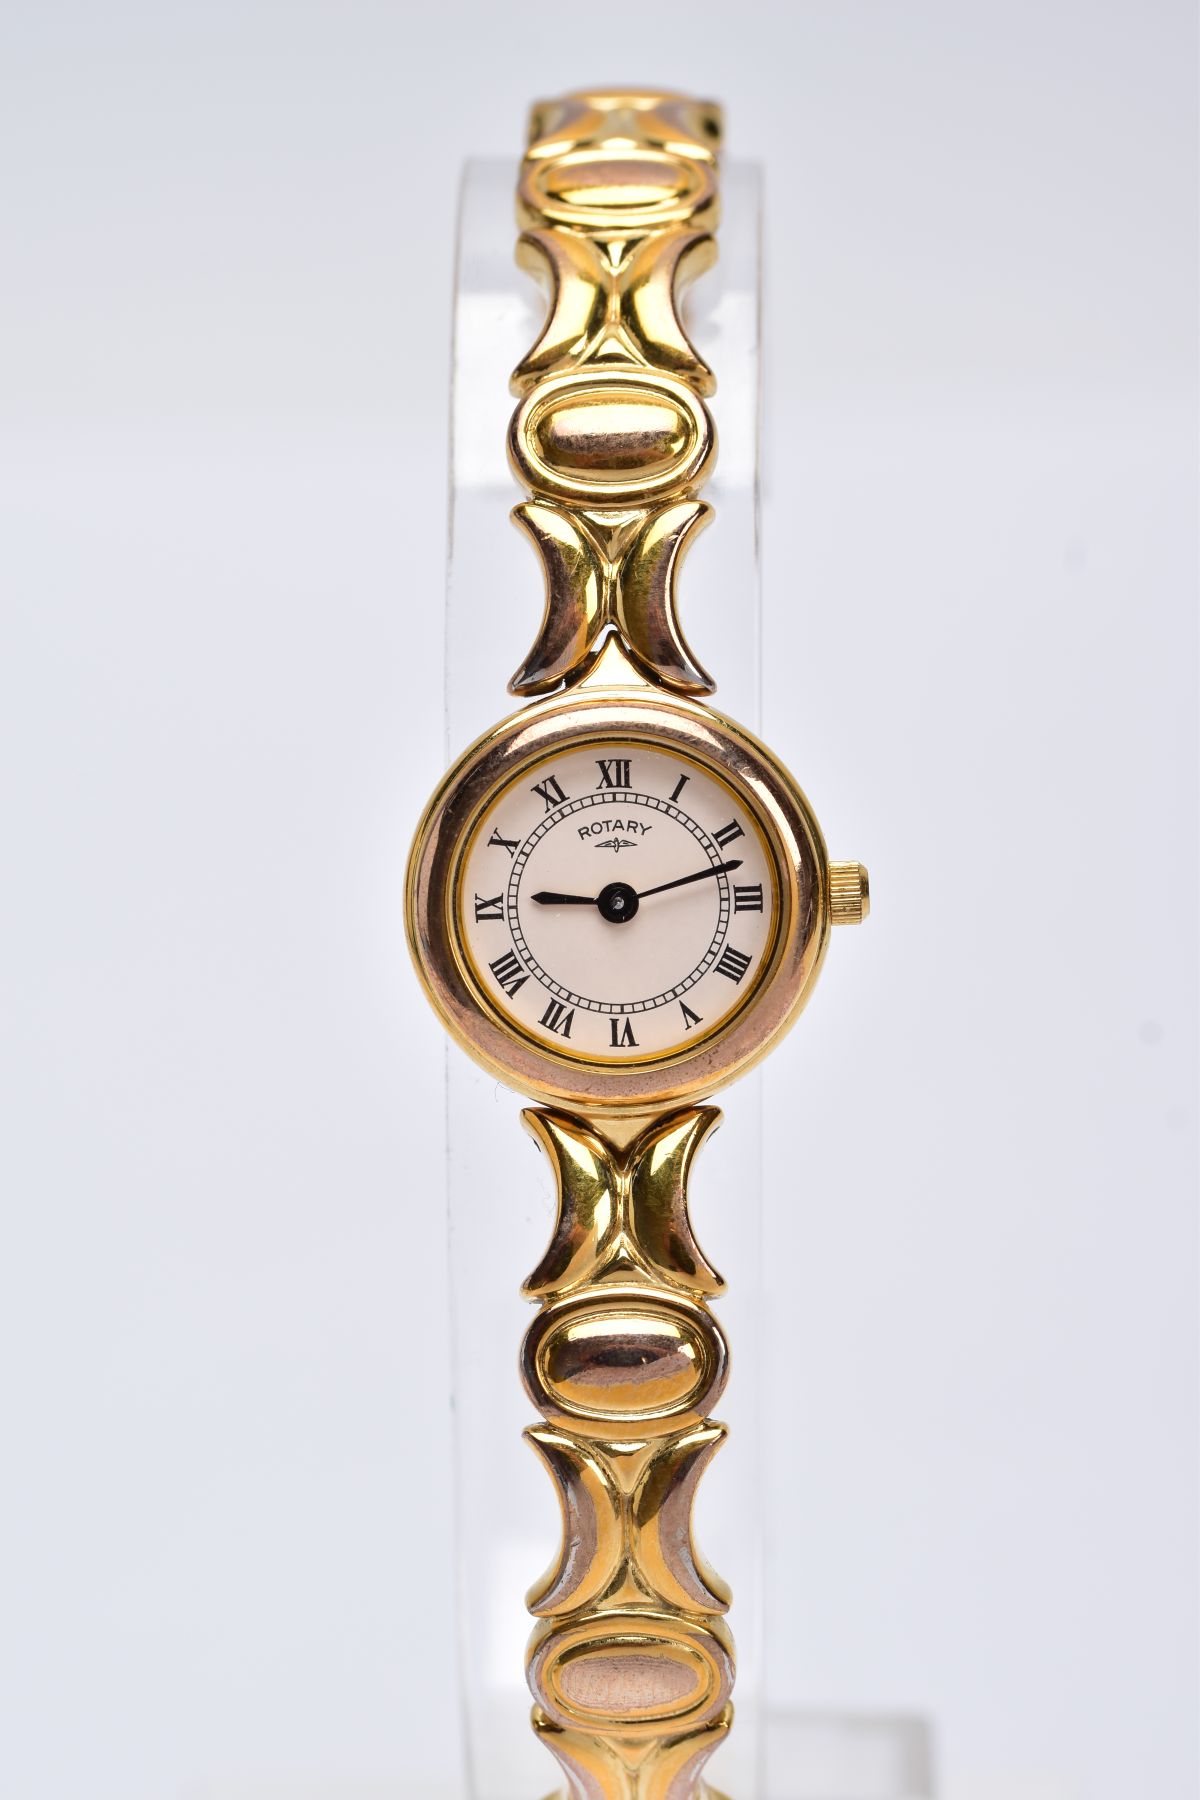 A LADY'S 'ROTARY' WRISTWATCH, quartz movement, round cream dial signed 'Rotary', Roman numerals,